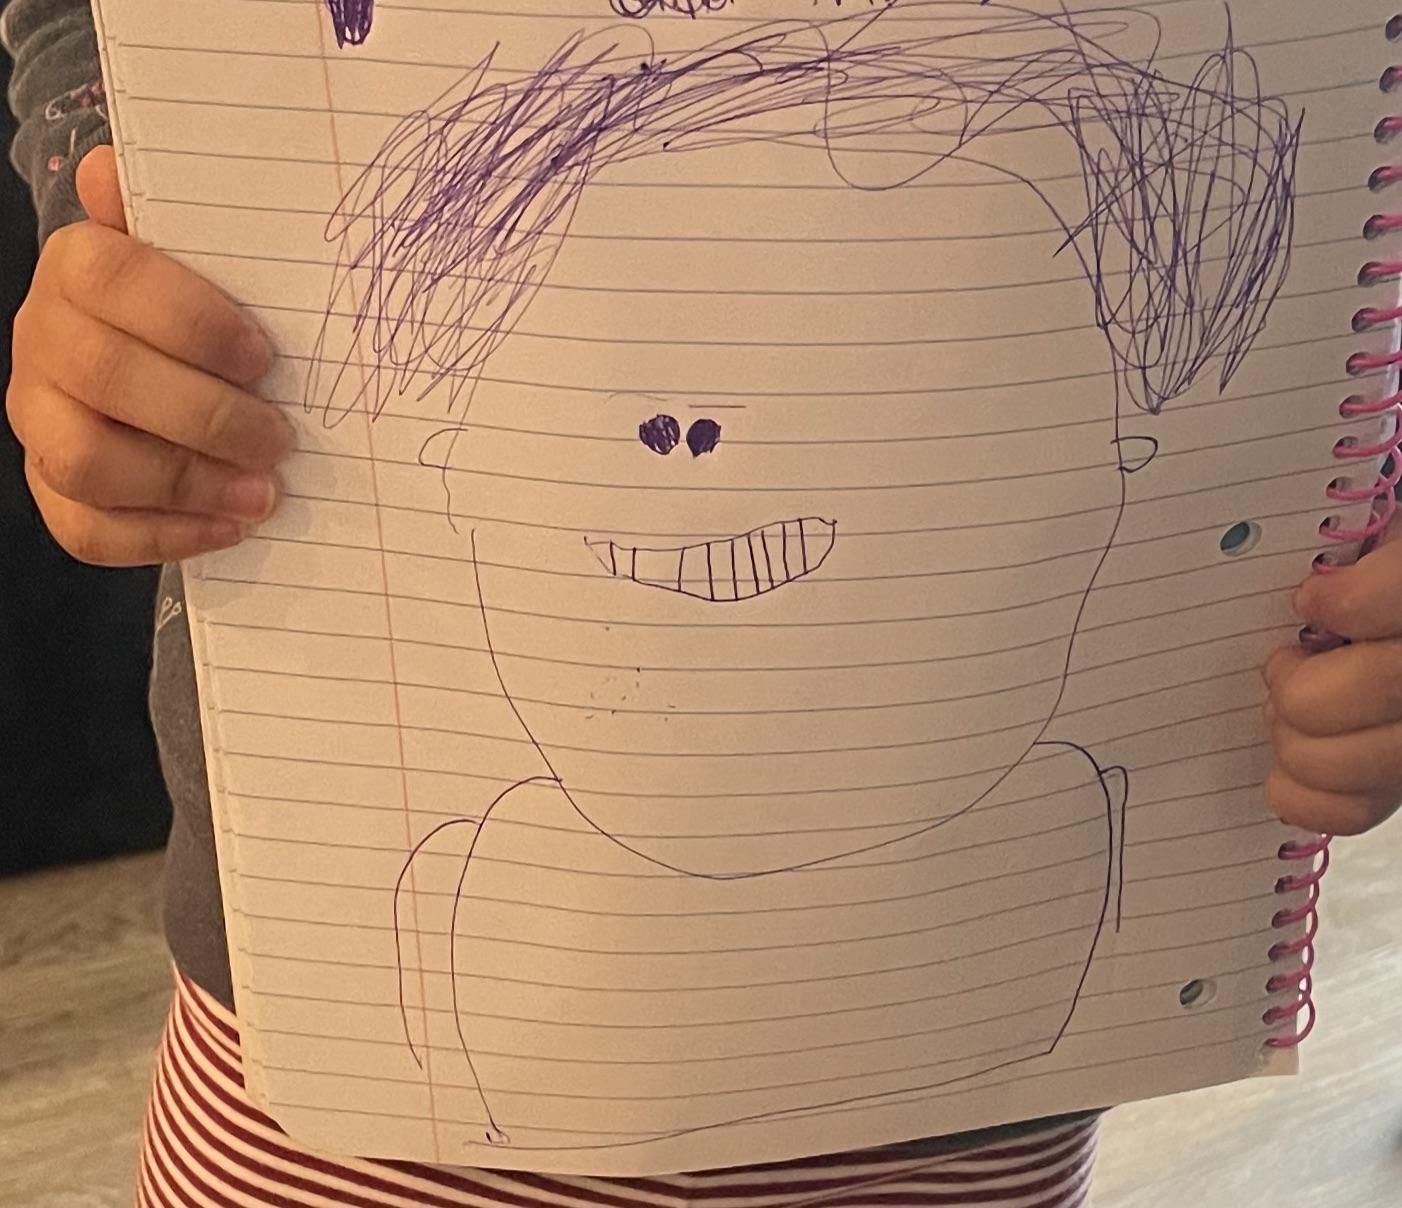 My 3 year old drew me, and her mom won't stop laughing at me.